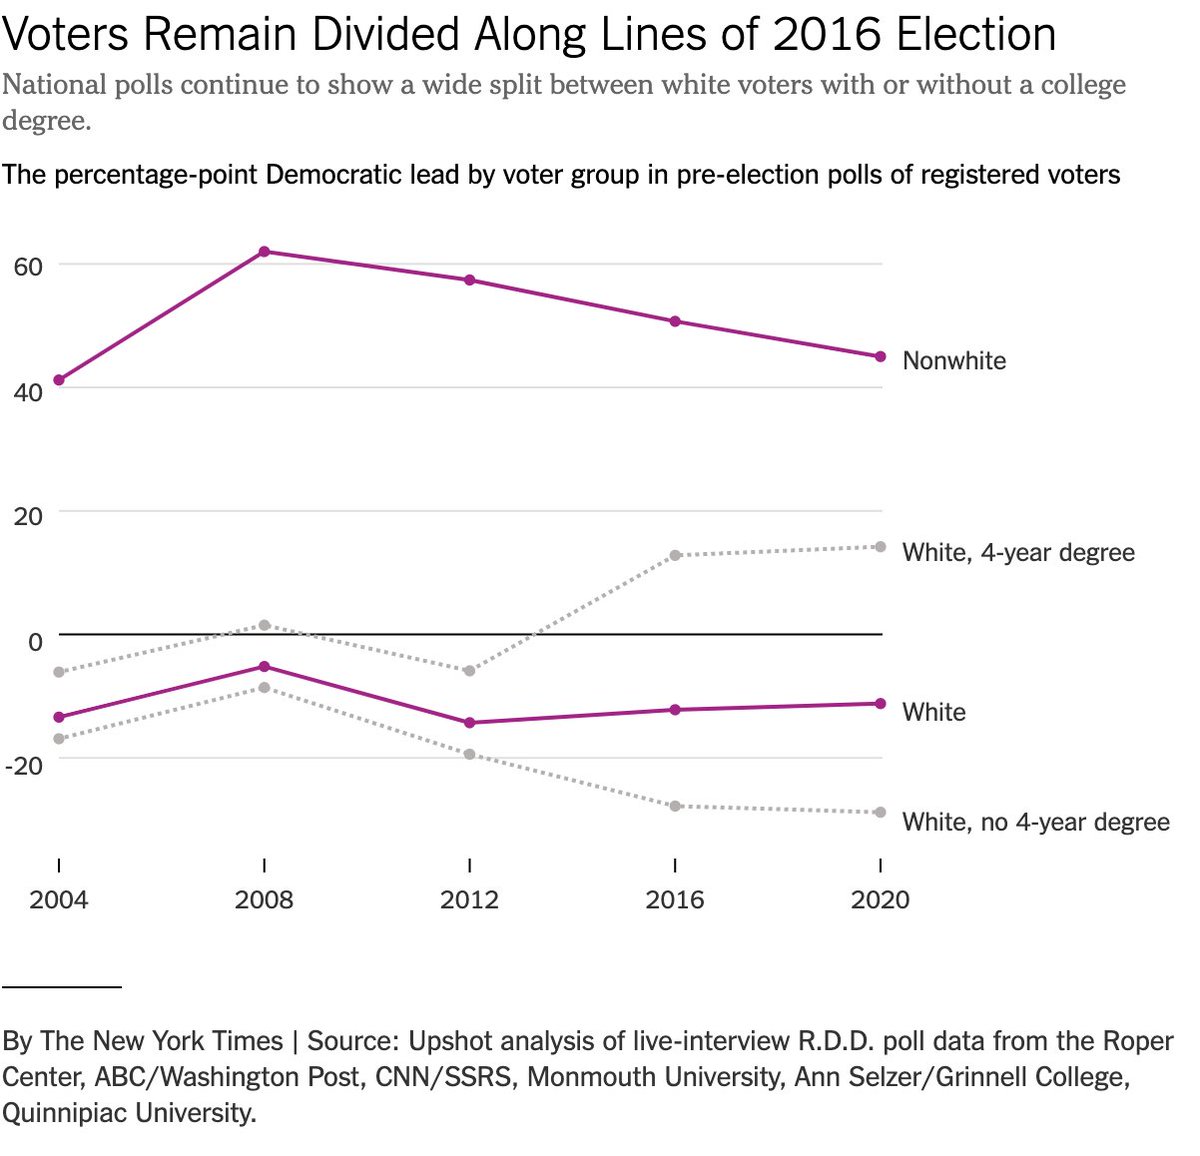 So far, national polls show virtually no change among white voters with or without college degree over the last four years. But Biden does appear to be doing quite a bit better among older voters and weaker among nonwhite voters